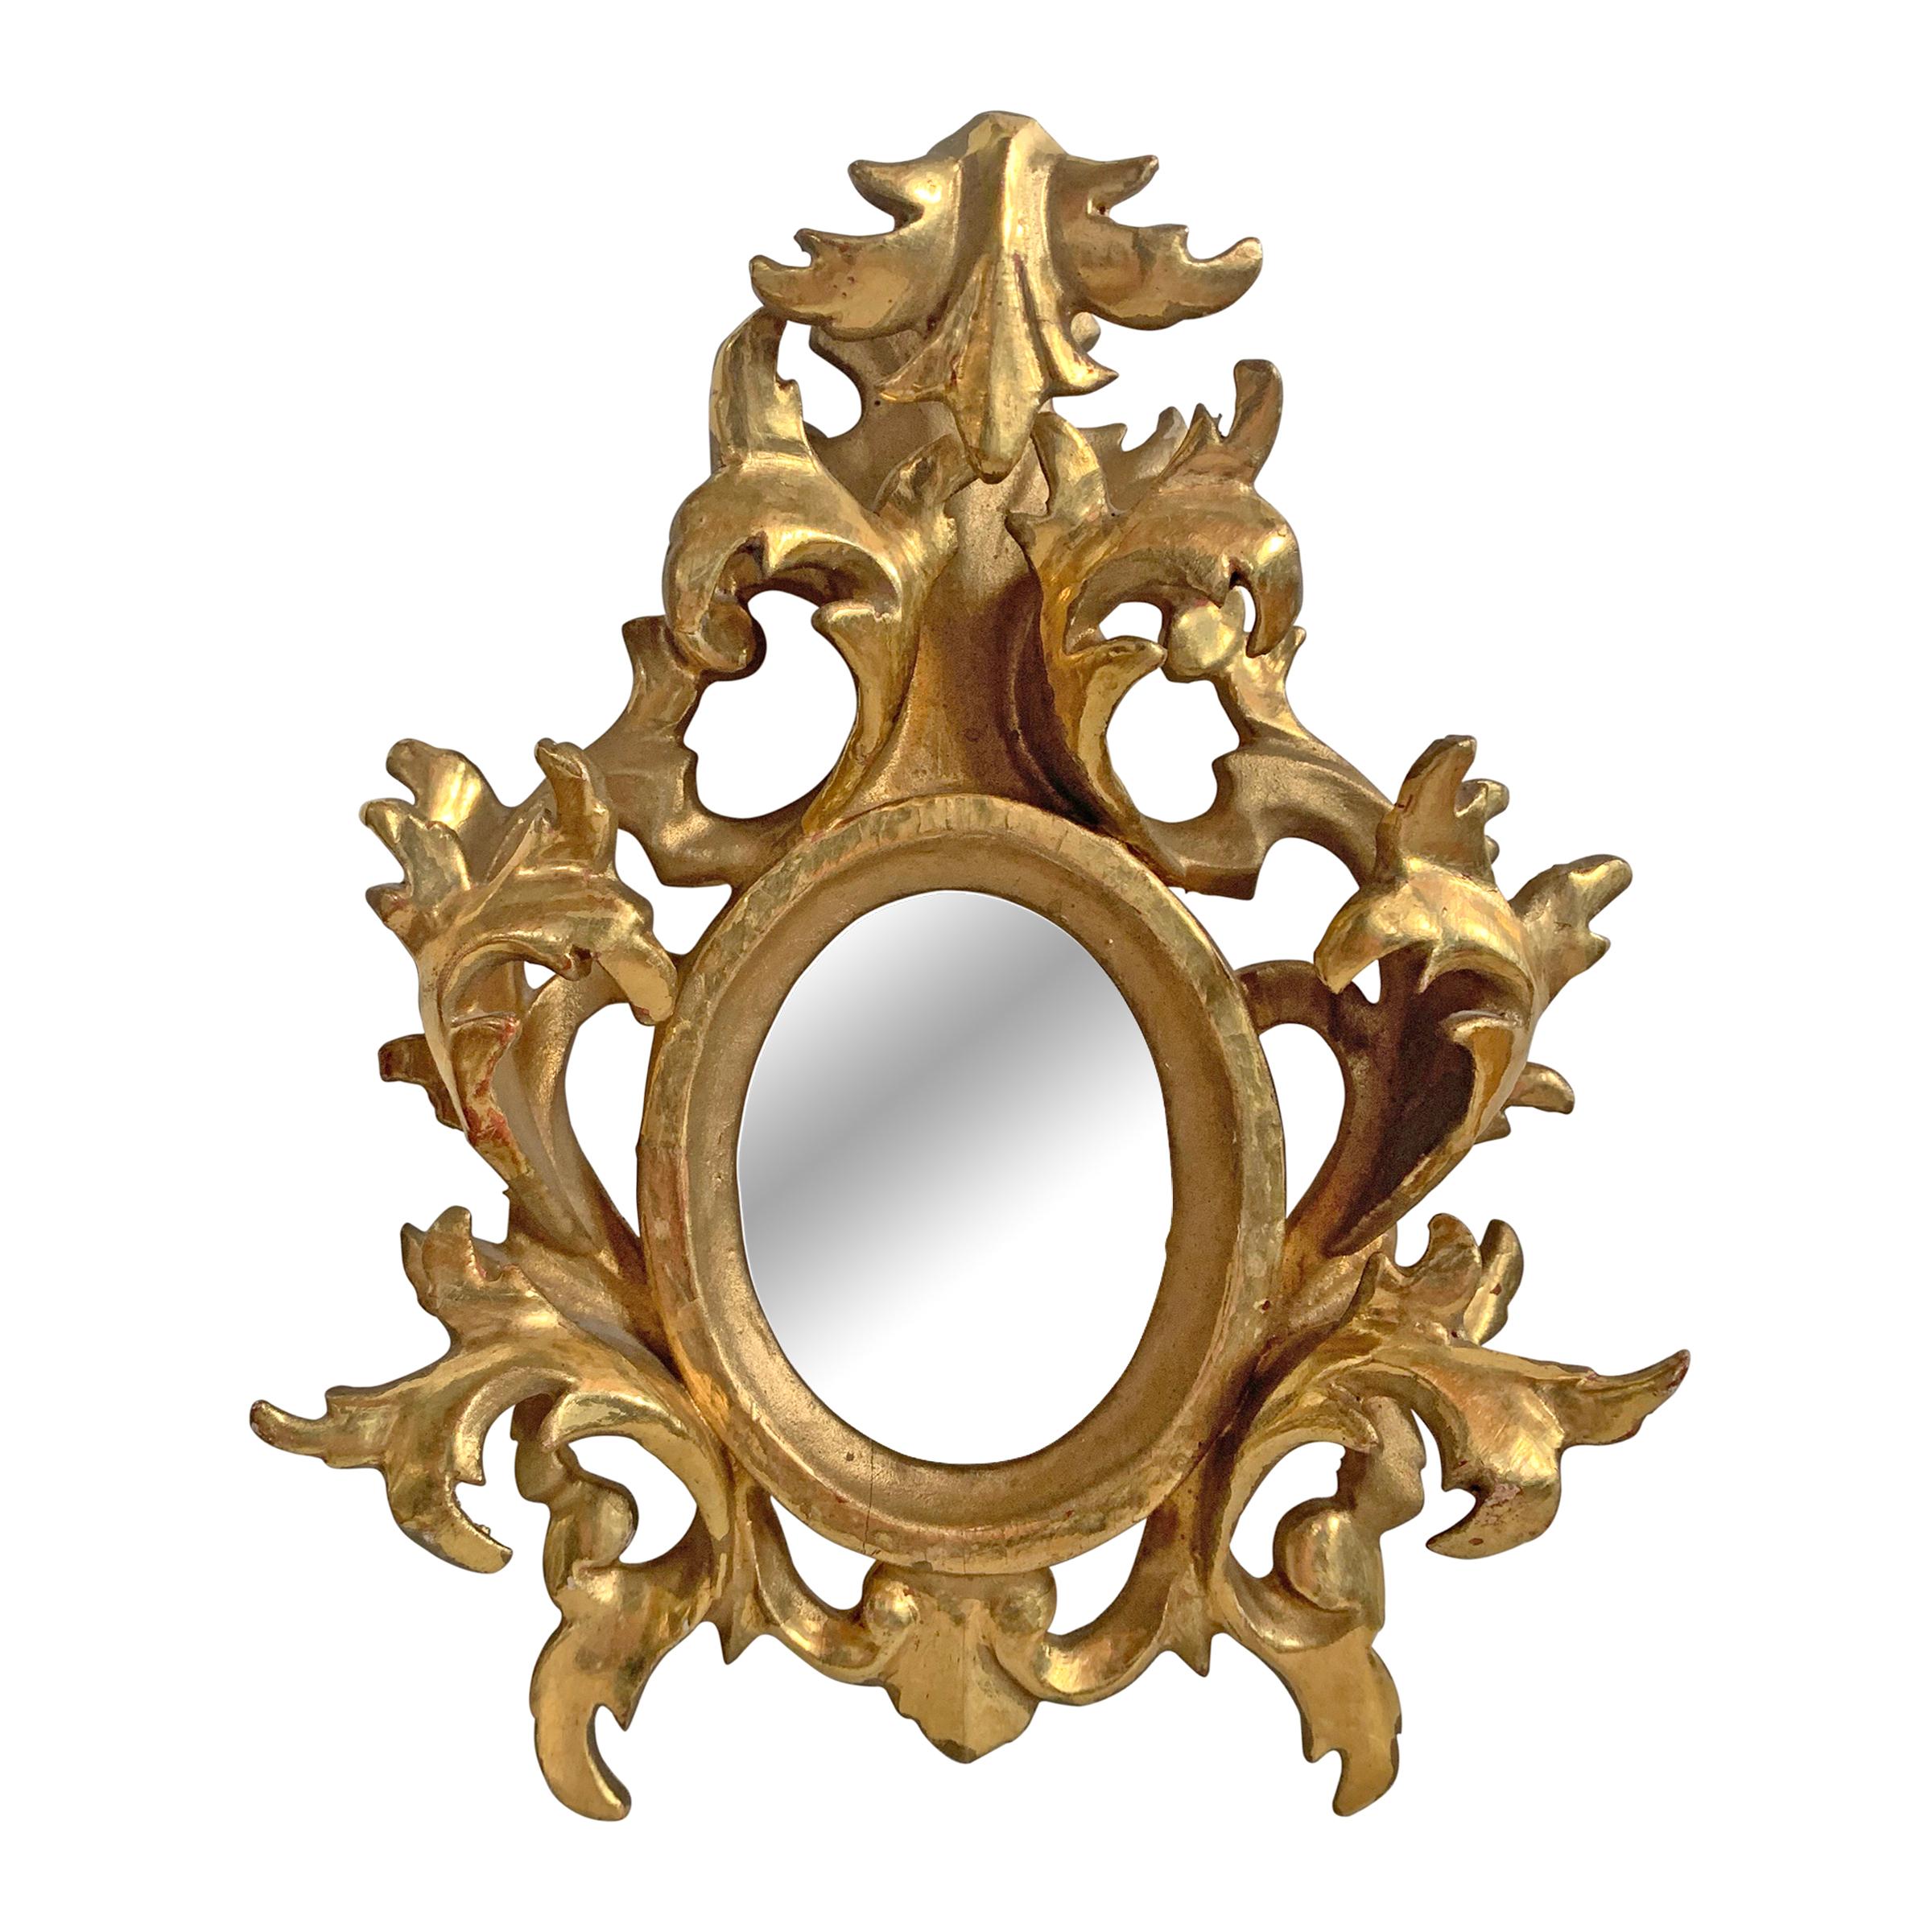 A lovely pair of petite scale Italian gilt framed mirrors with Baroque-style acanthus leaves in high relief.

Mirror size is 2 in. W x 2.75 in. H.